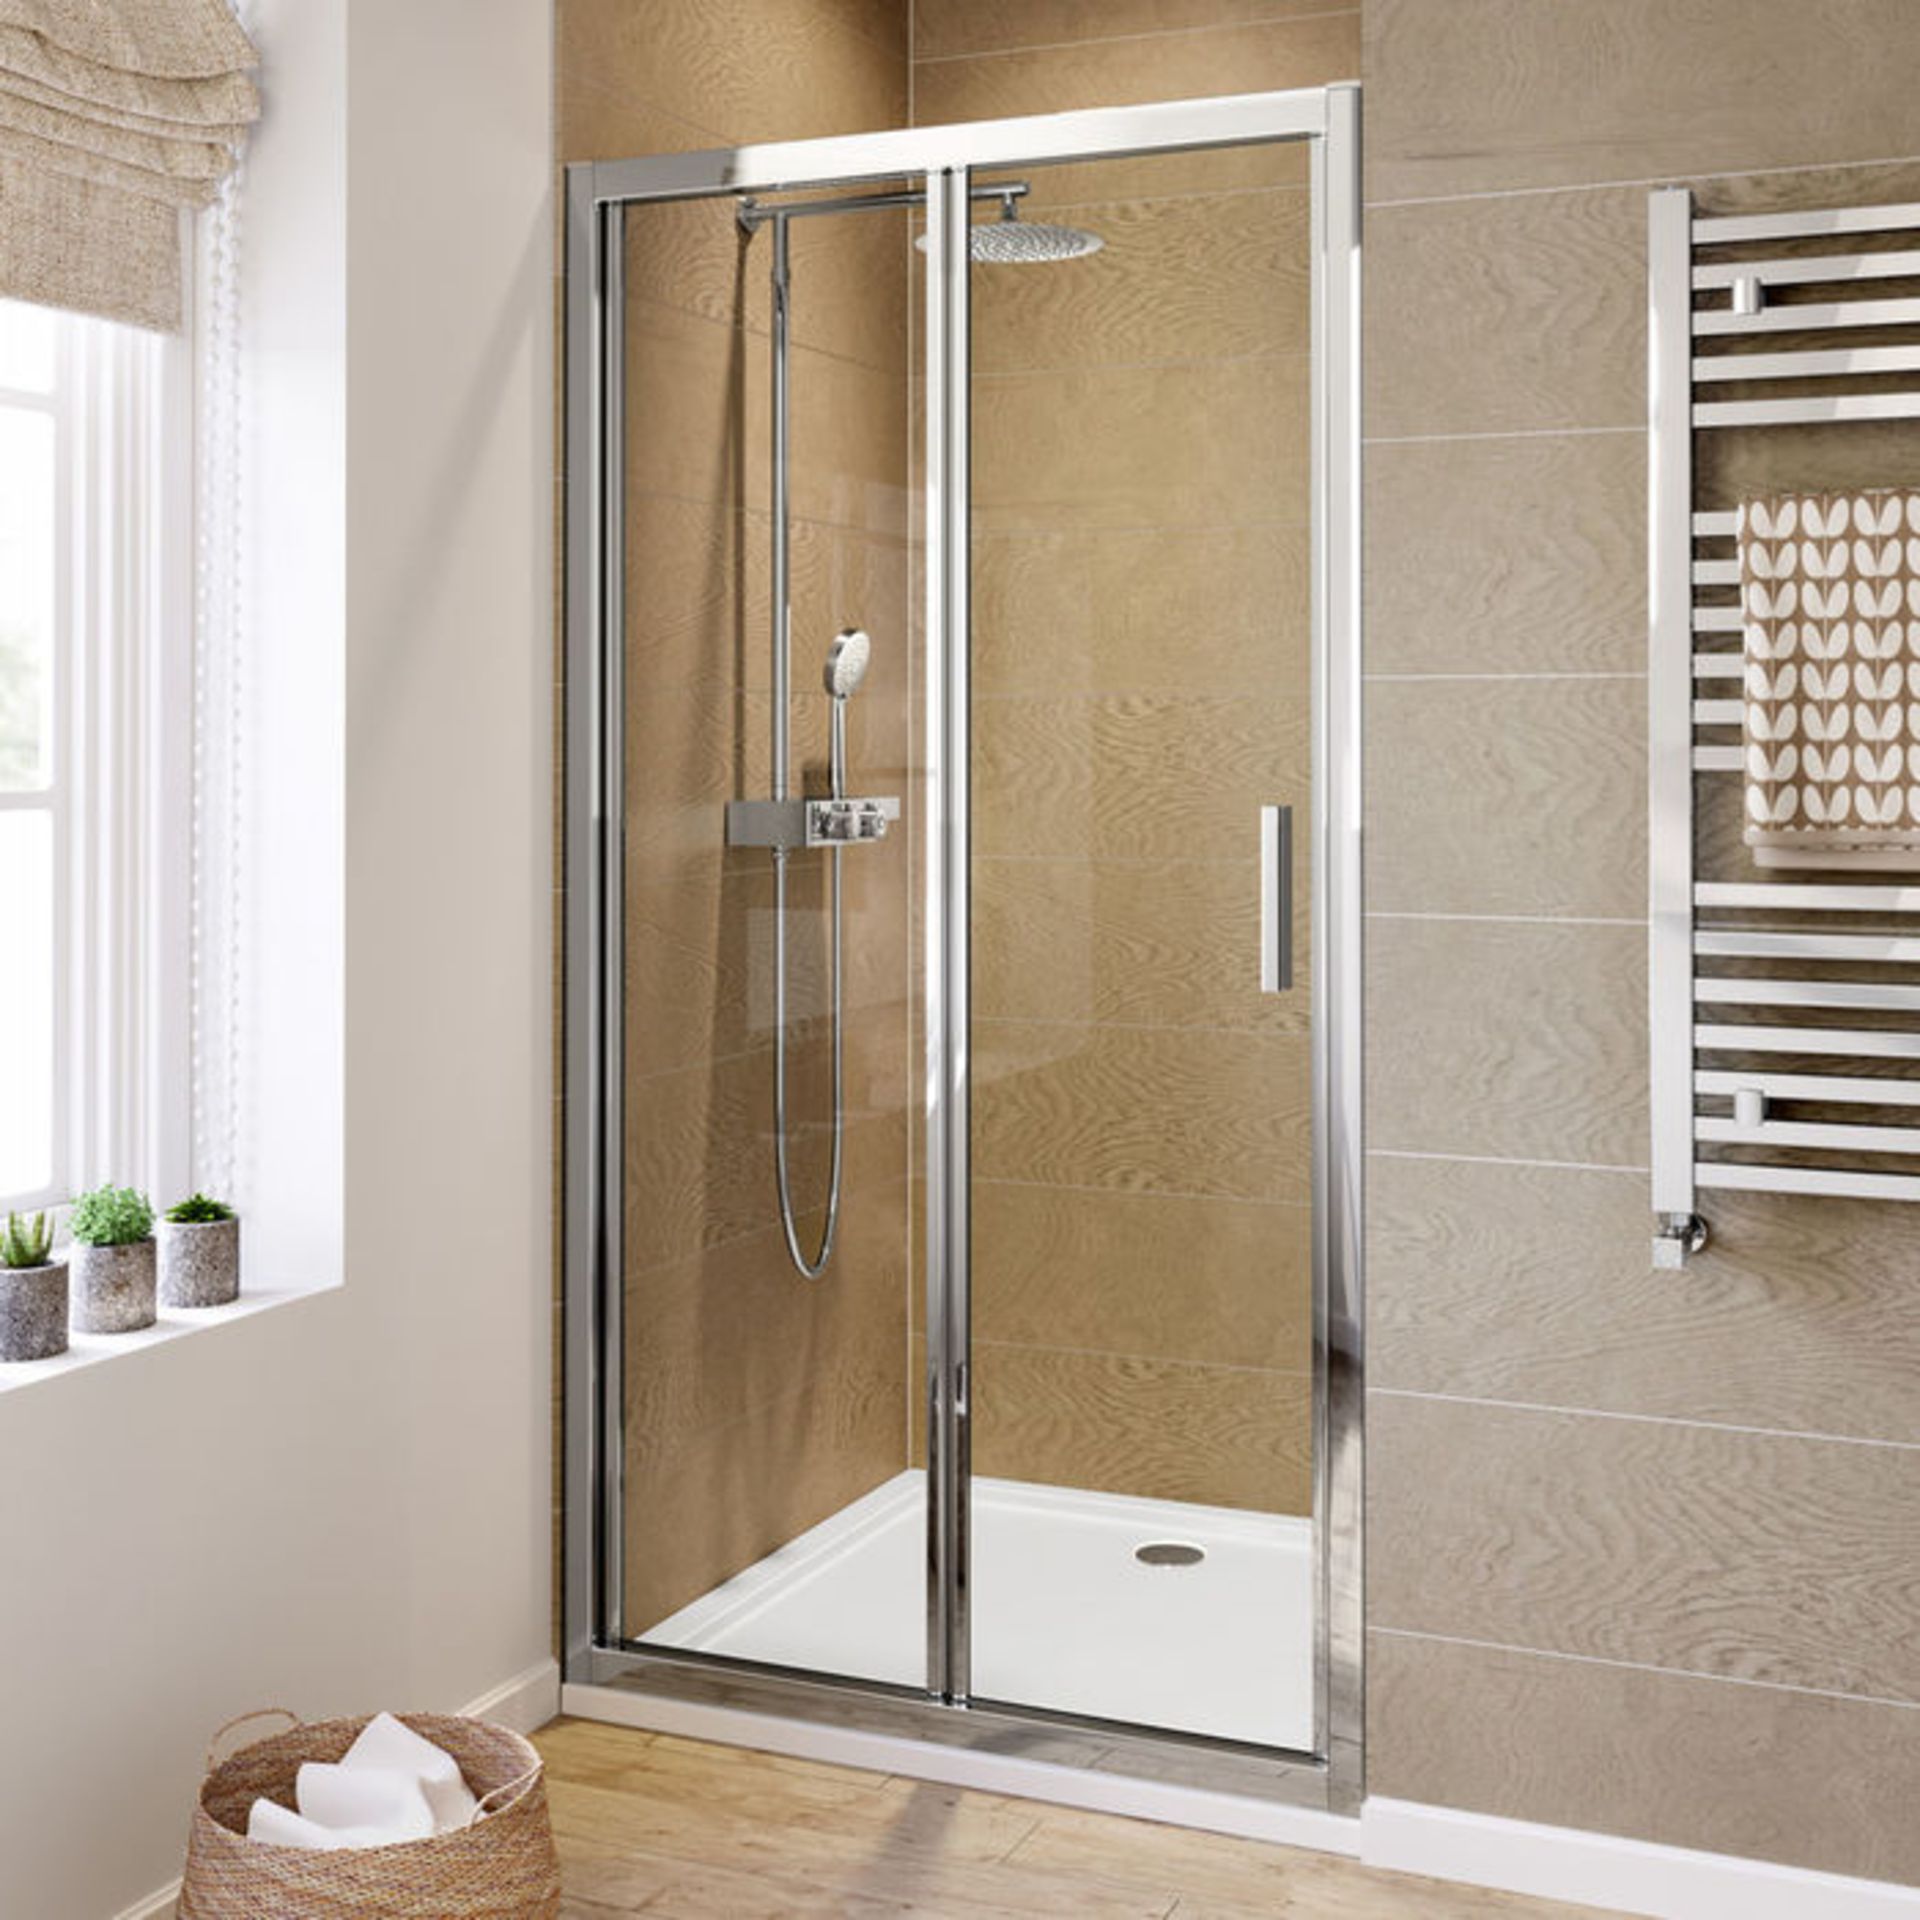 (ZA215) 1000mm - 6mm - Elements EasyClean Bifold Shower Door. RRP £239.99. 6mm Safety Glass - - Image 3 of 3